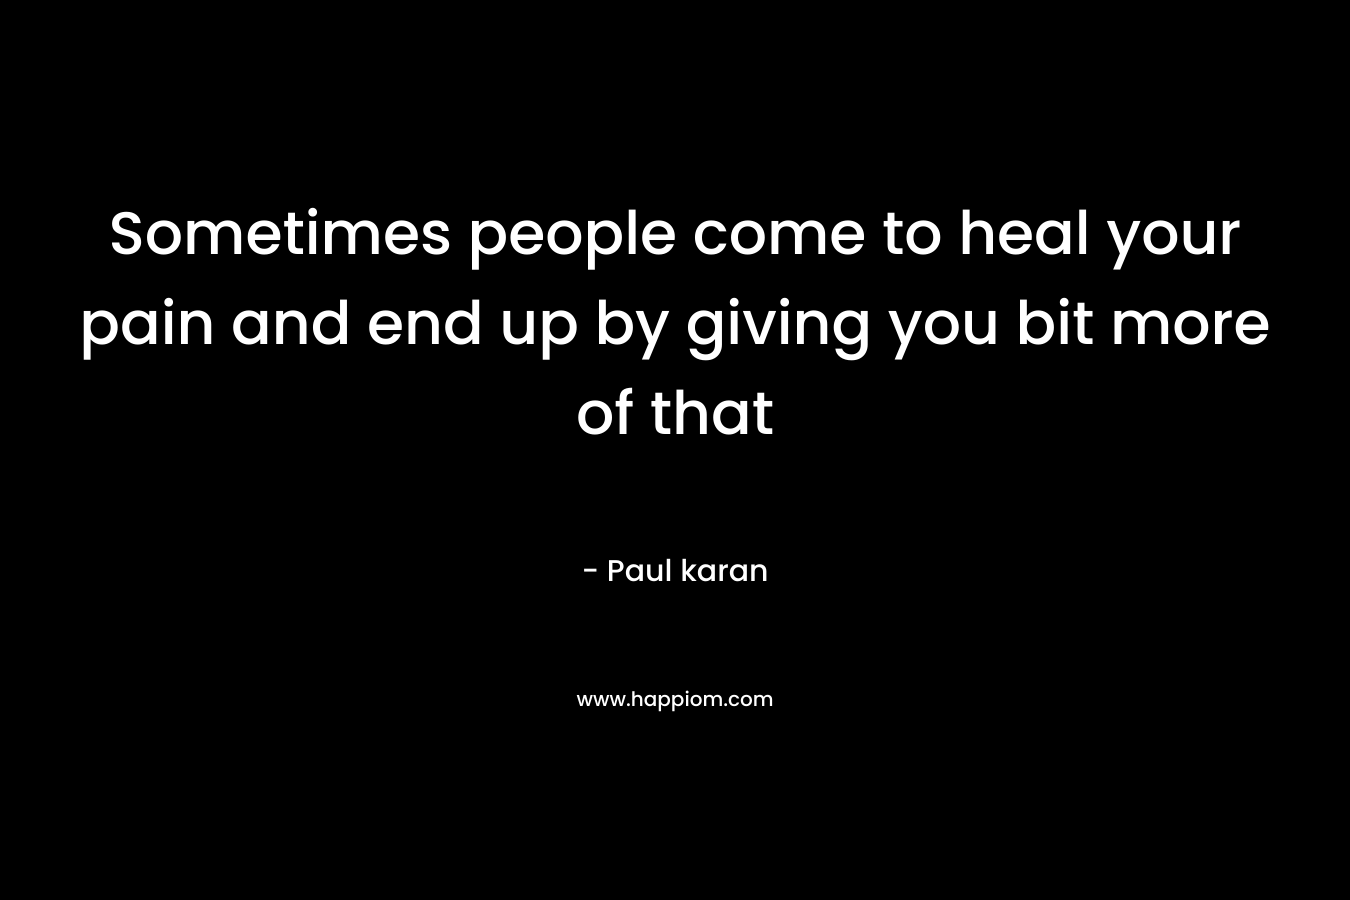 Sometimes people come to heal your pain and end up by giving you bit more of that